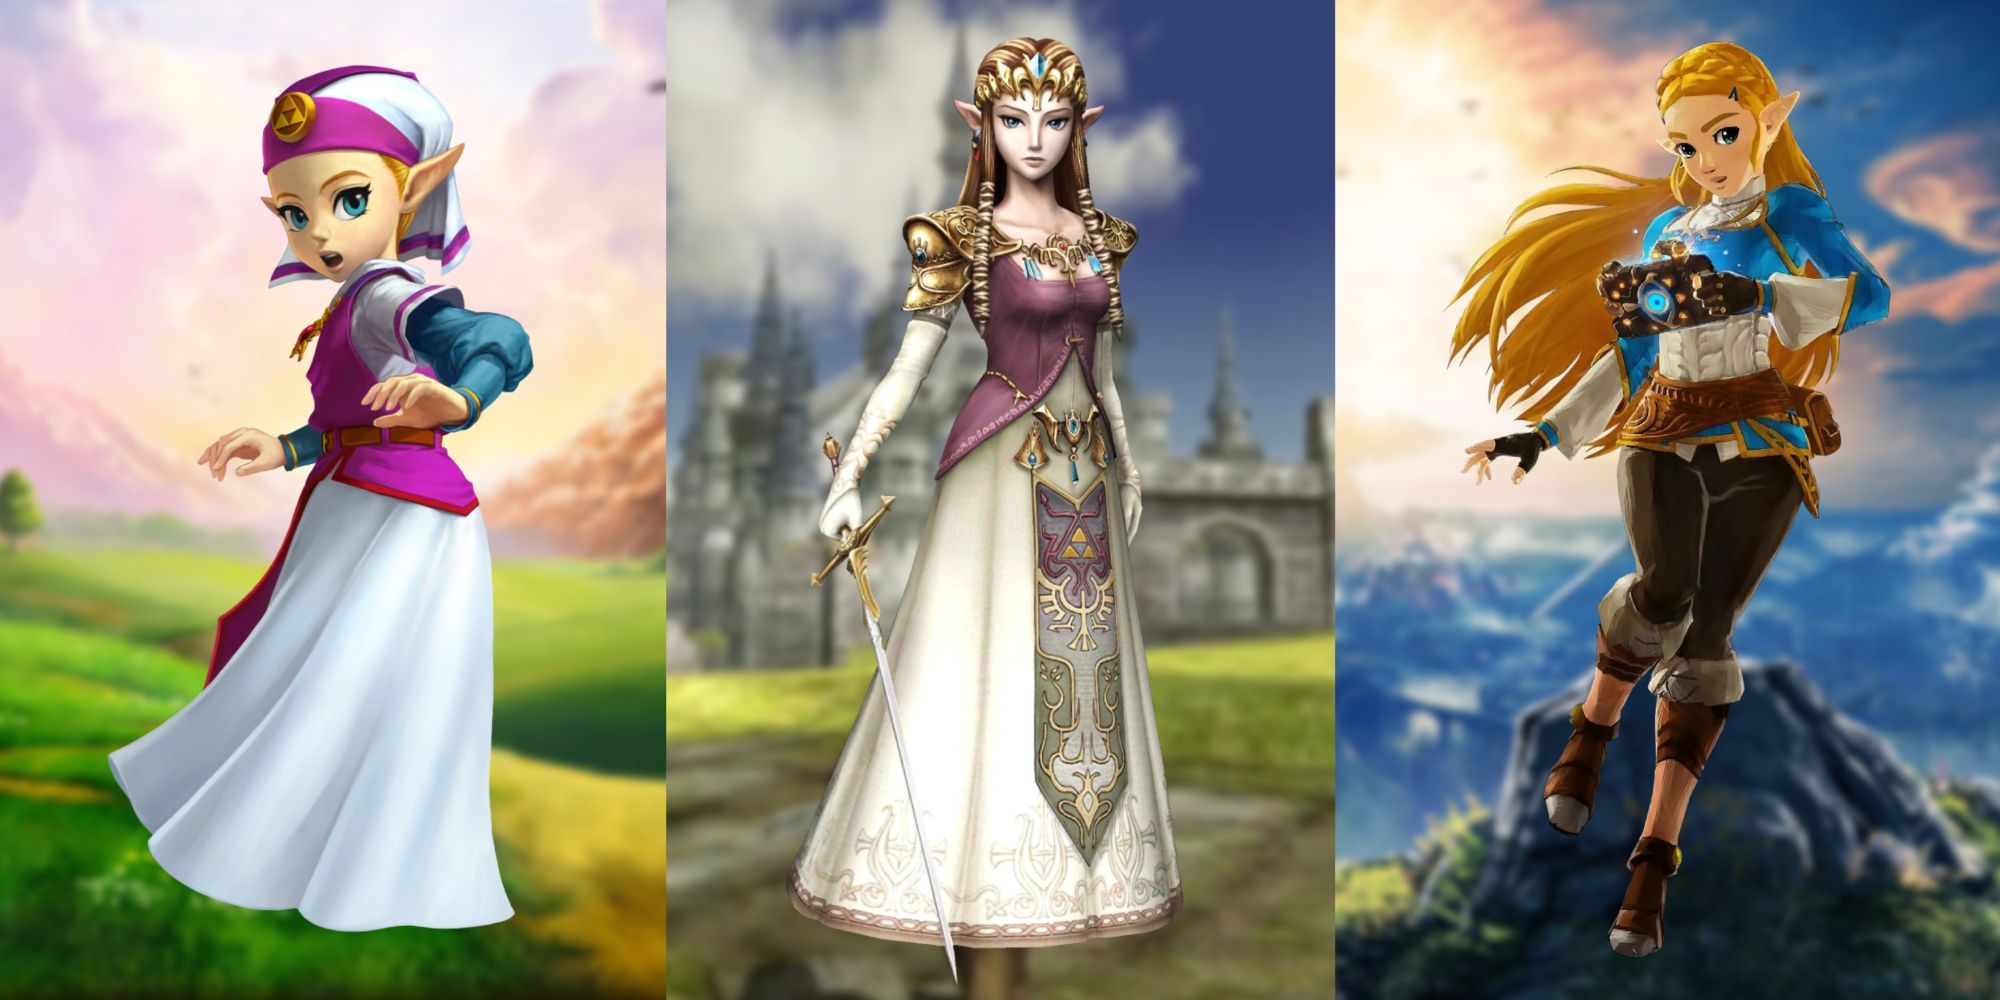 Princess Zelda from Ocarina of Time 3D, Twilight Princess, and Breath of the Wild